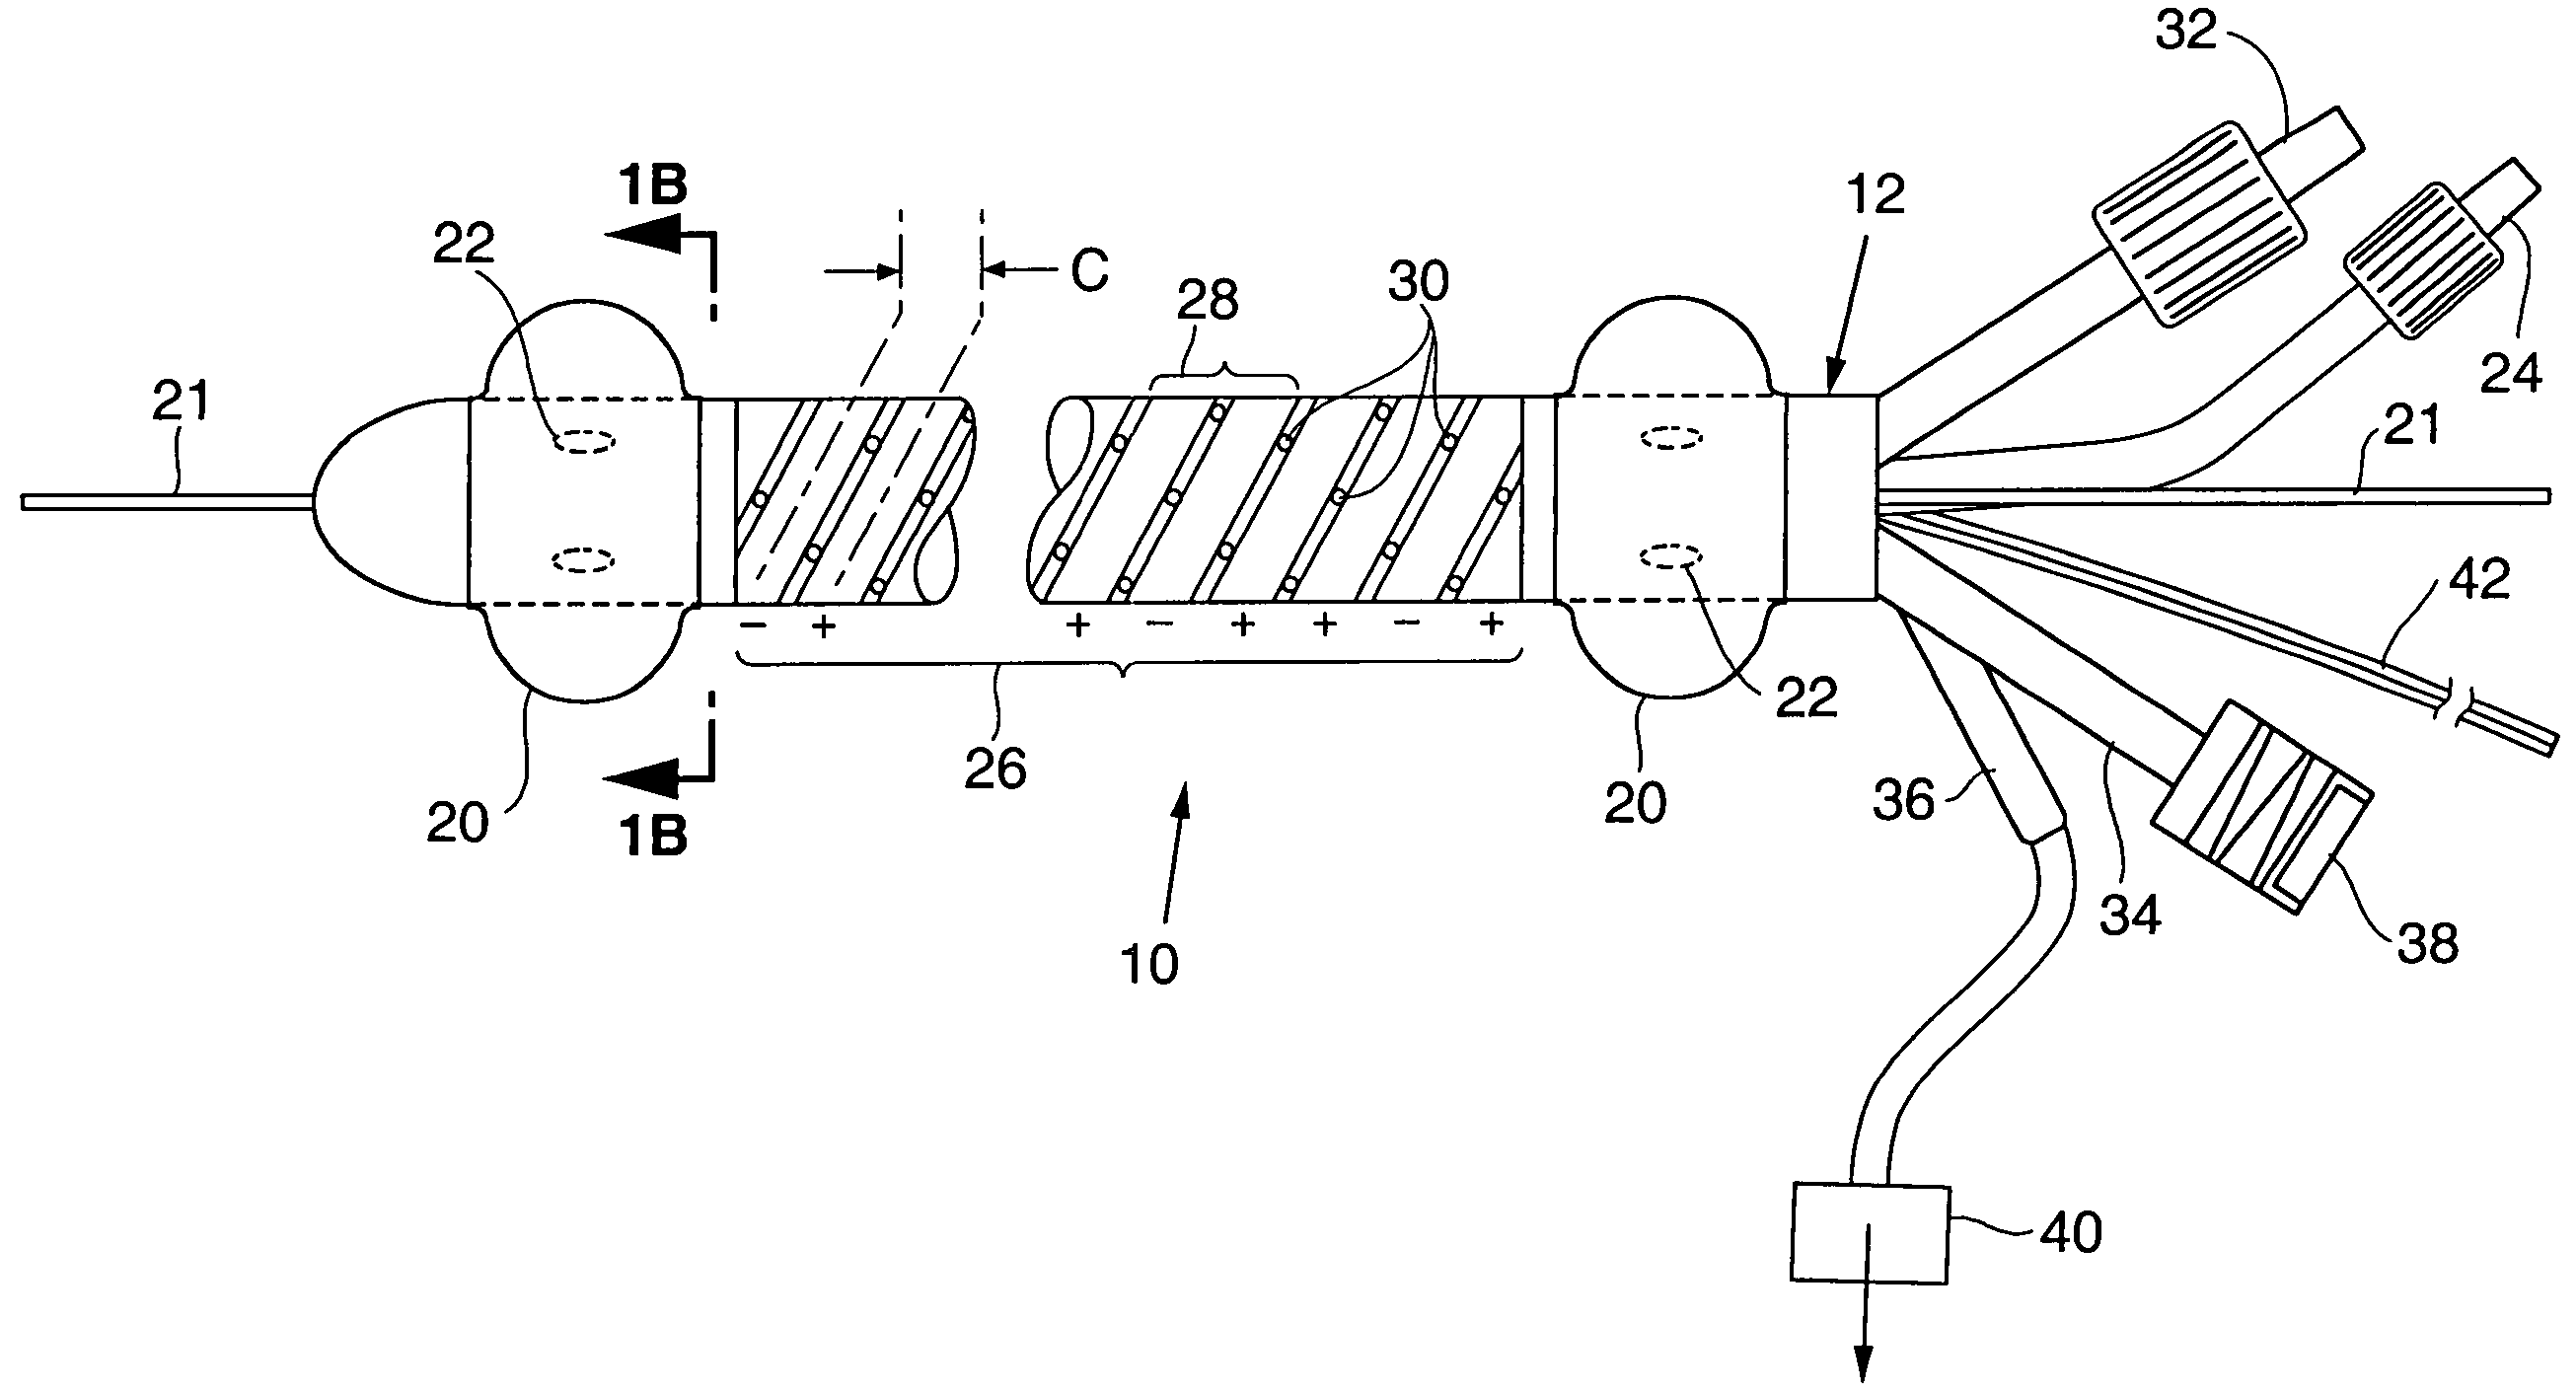 Apparatus and method for treating venous reflux